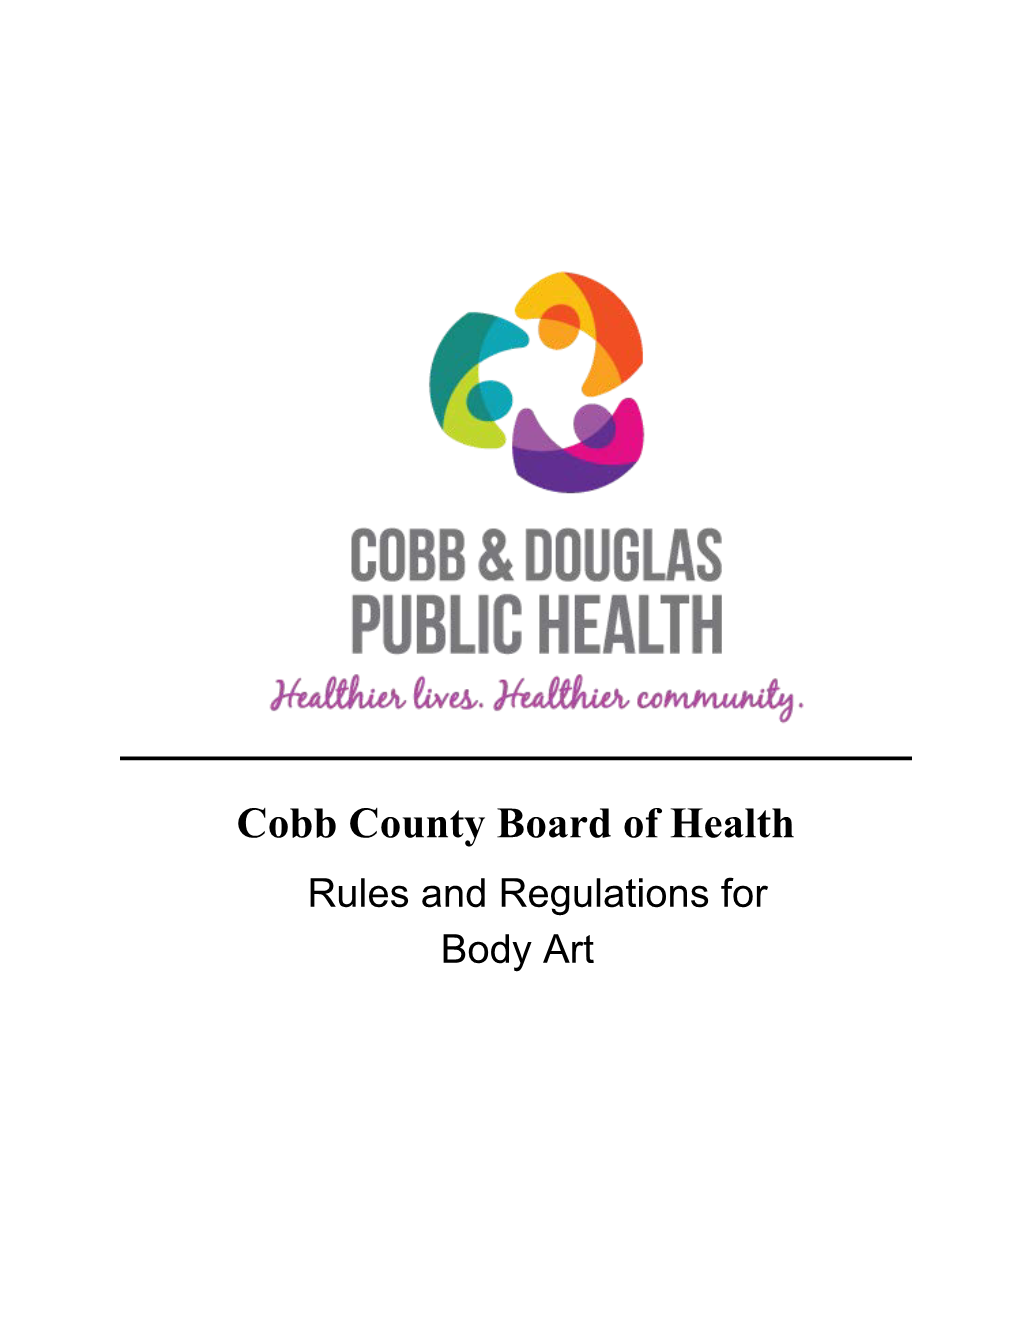 Cobb County Board of Health Rules and Regulations for Body Art